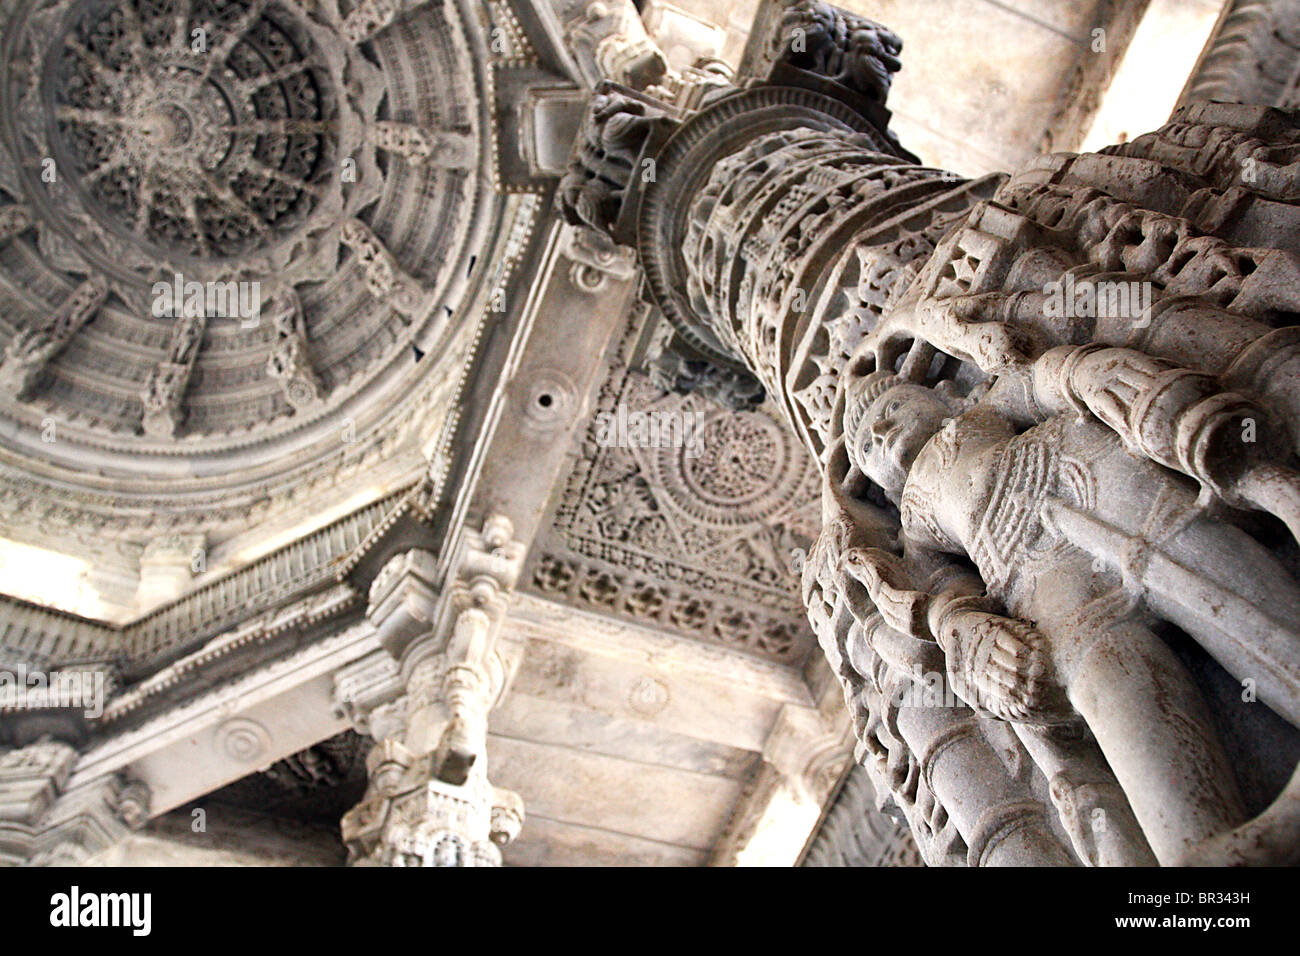 Intricately carve stone mandala ceiling and Jain holy figure in the great Jain temple of Ranakpur in Rajasthan, India. Stock Photo